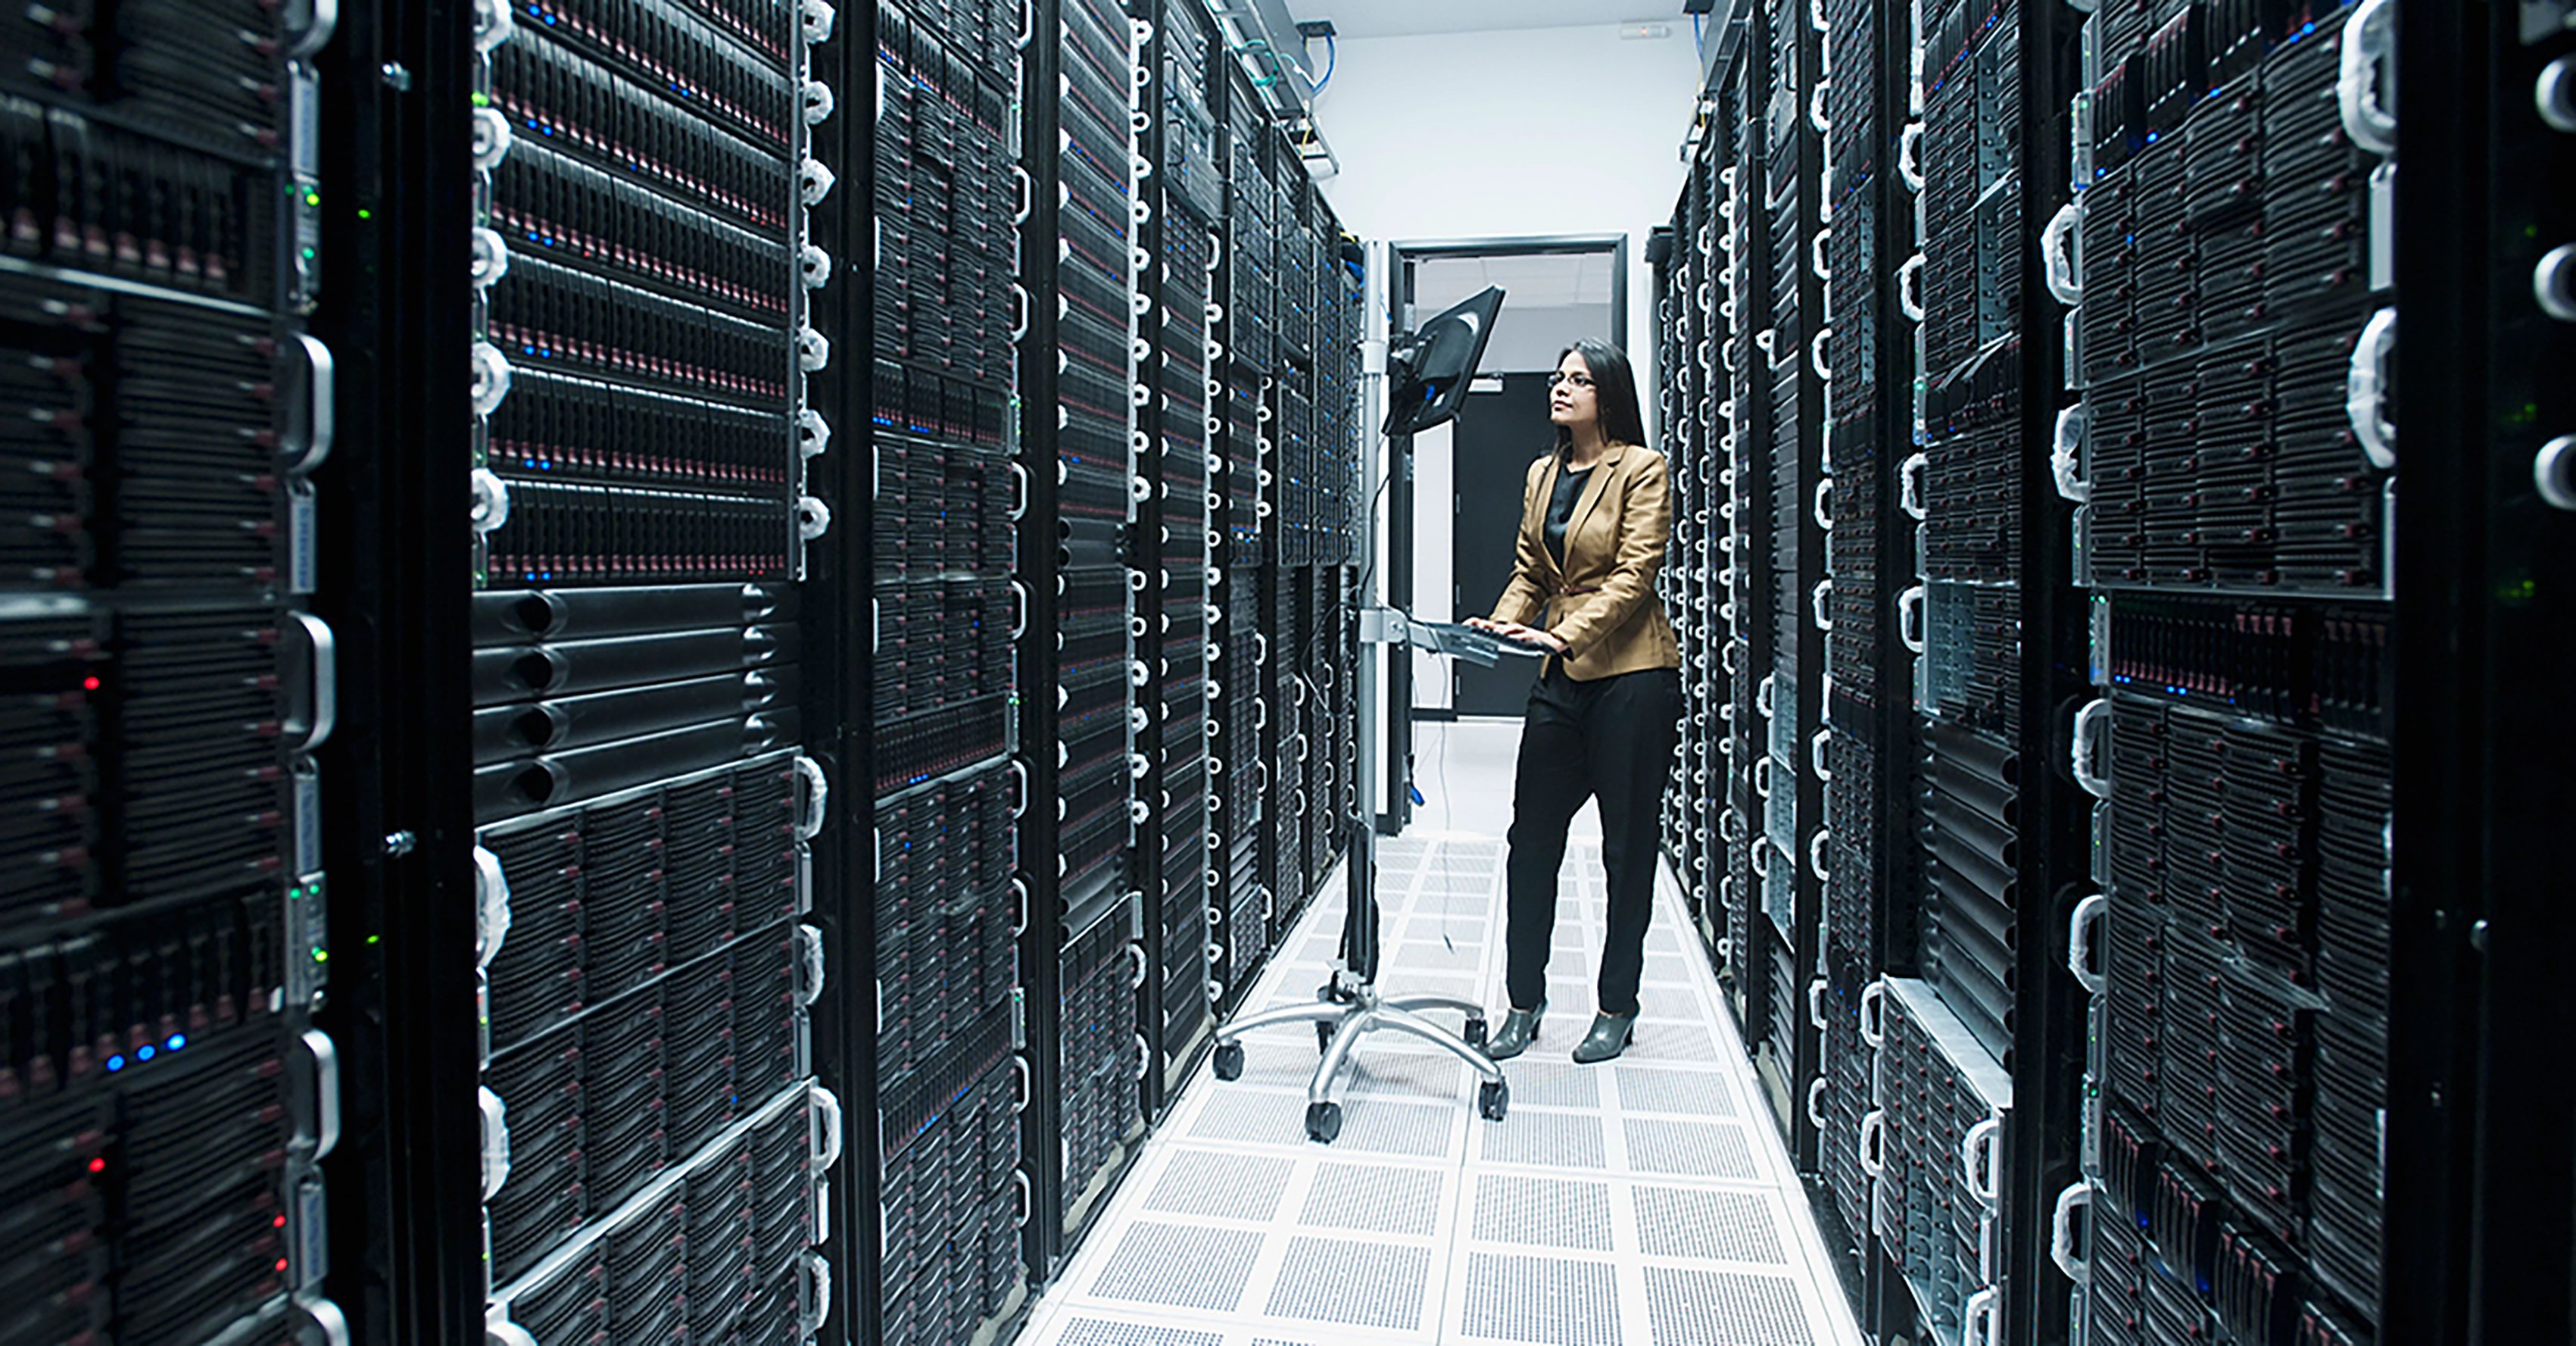 A woman working in a data center